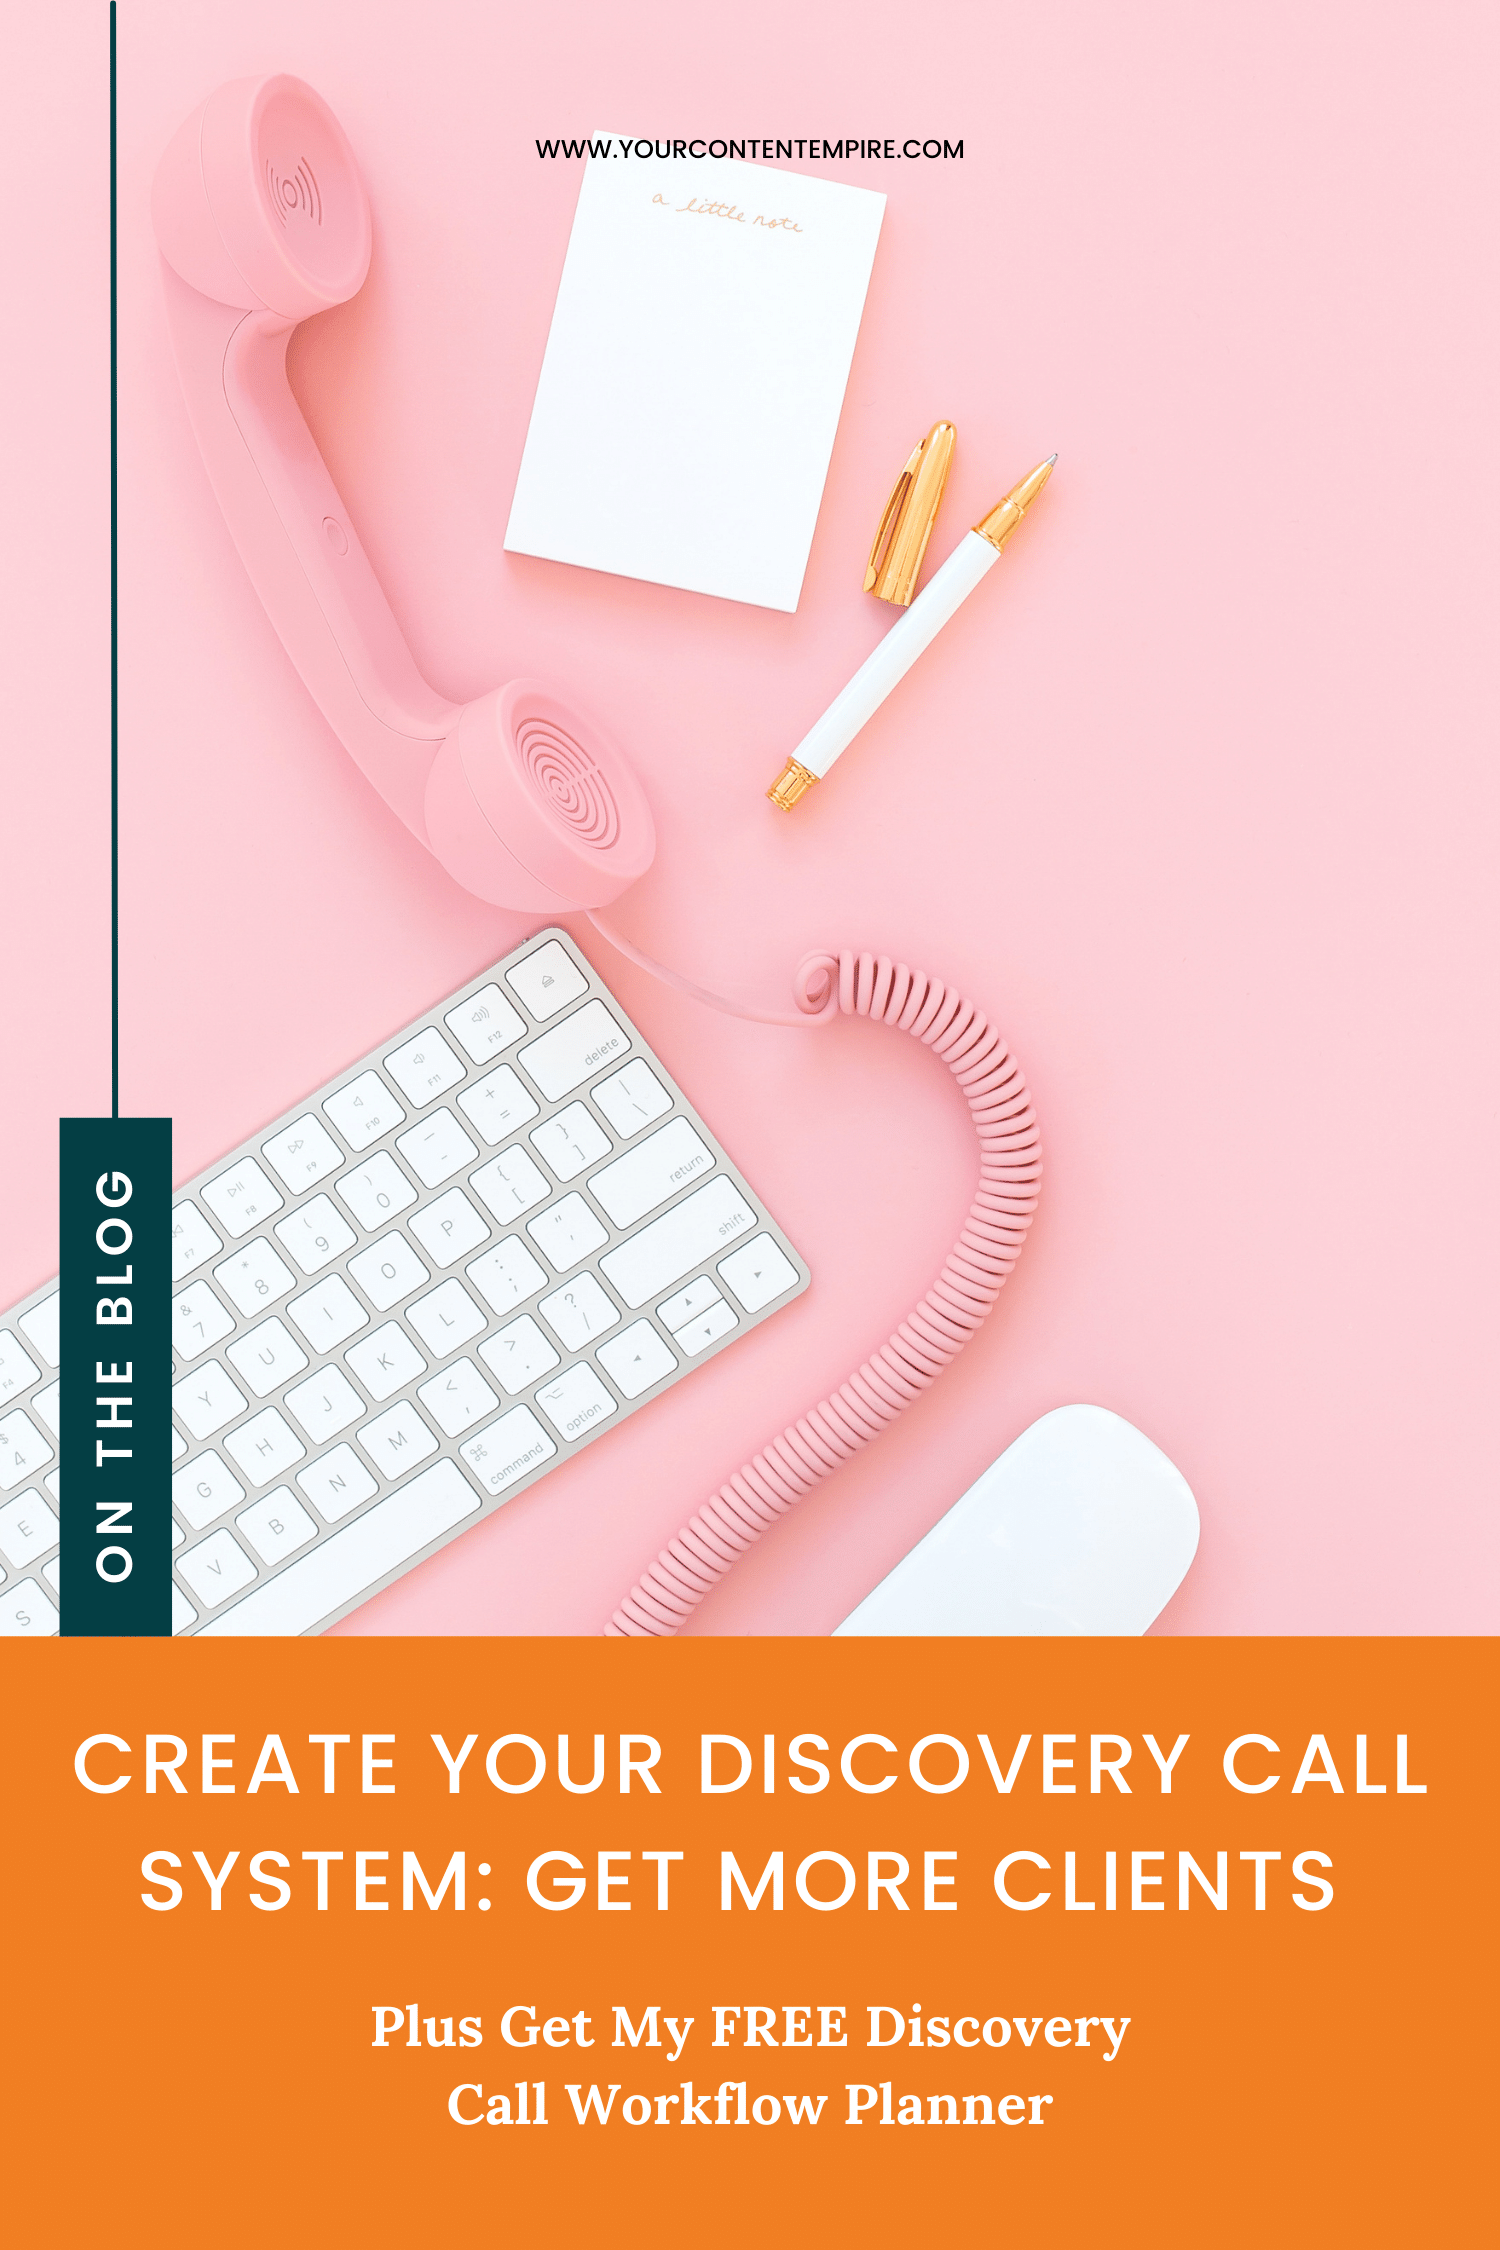 Create Your Discovery Call System: Get More Clients